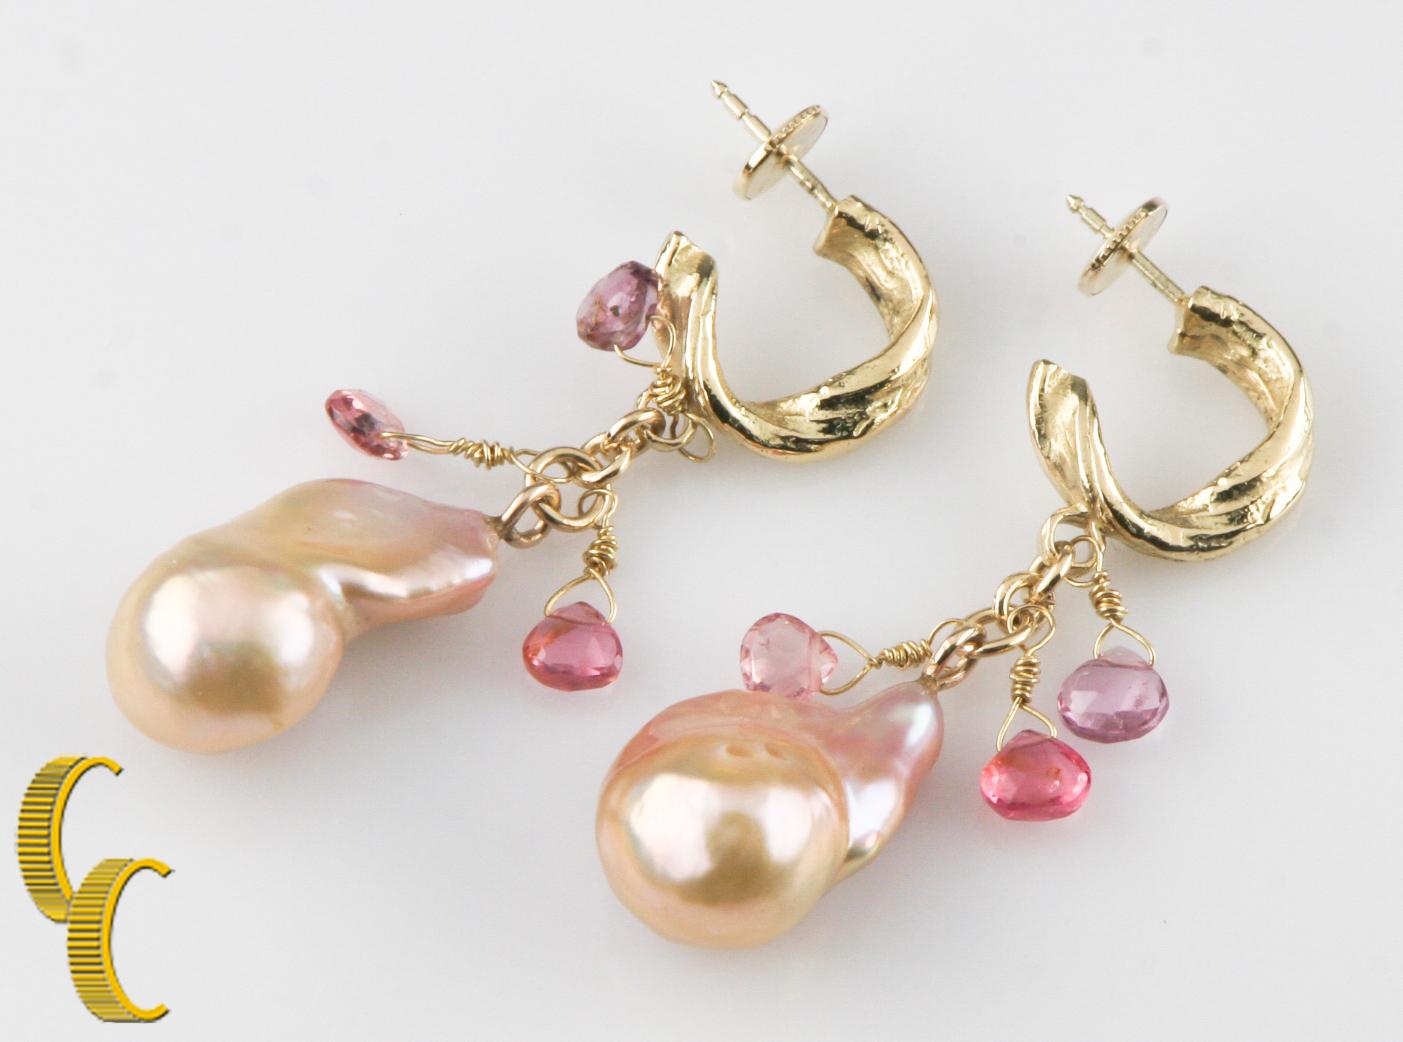 Gorgeous, Unique Pearl Earrings
Feature Baroque Pearls with Pink, Purple, and Green Pearlescence
Pearls are 19-20 mm Long, 11-14 mm Wide
Dangle from 14k Yellow Gold Textured Hoops
Hoops are 14 mm in Diameter
Also Include Three Dangling Briolette Cut